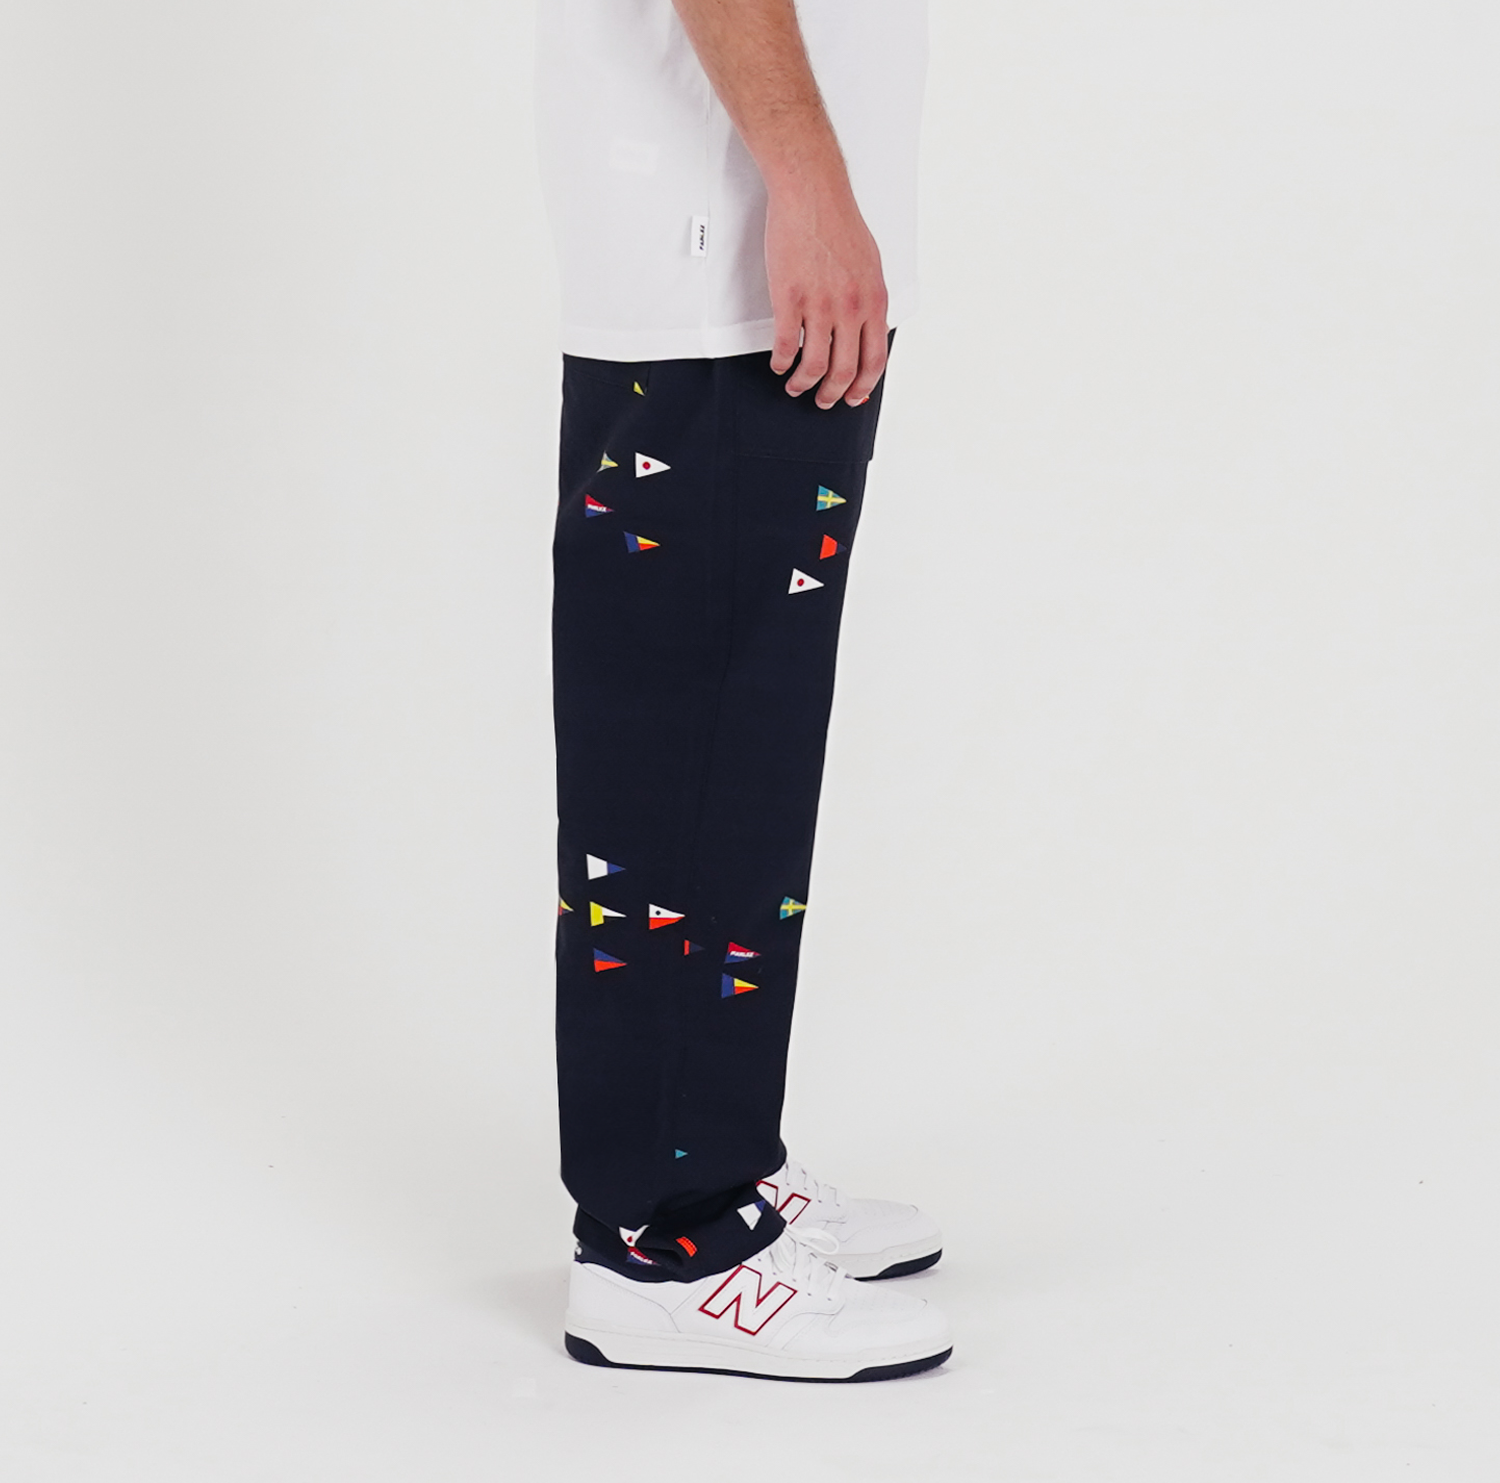 The Mens Surf Pant Printed Flag/Topaz Navy from Parlez clothing